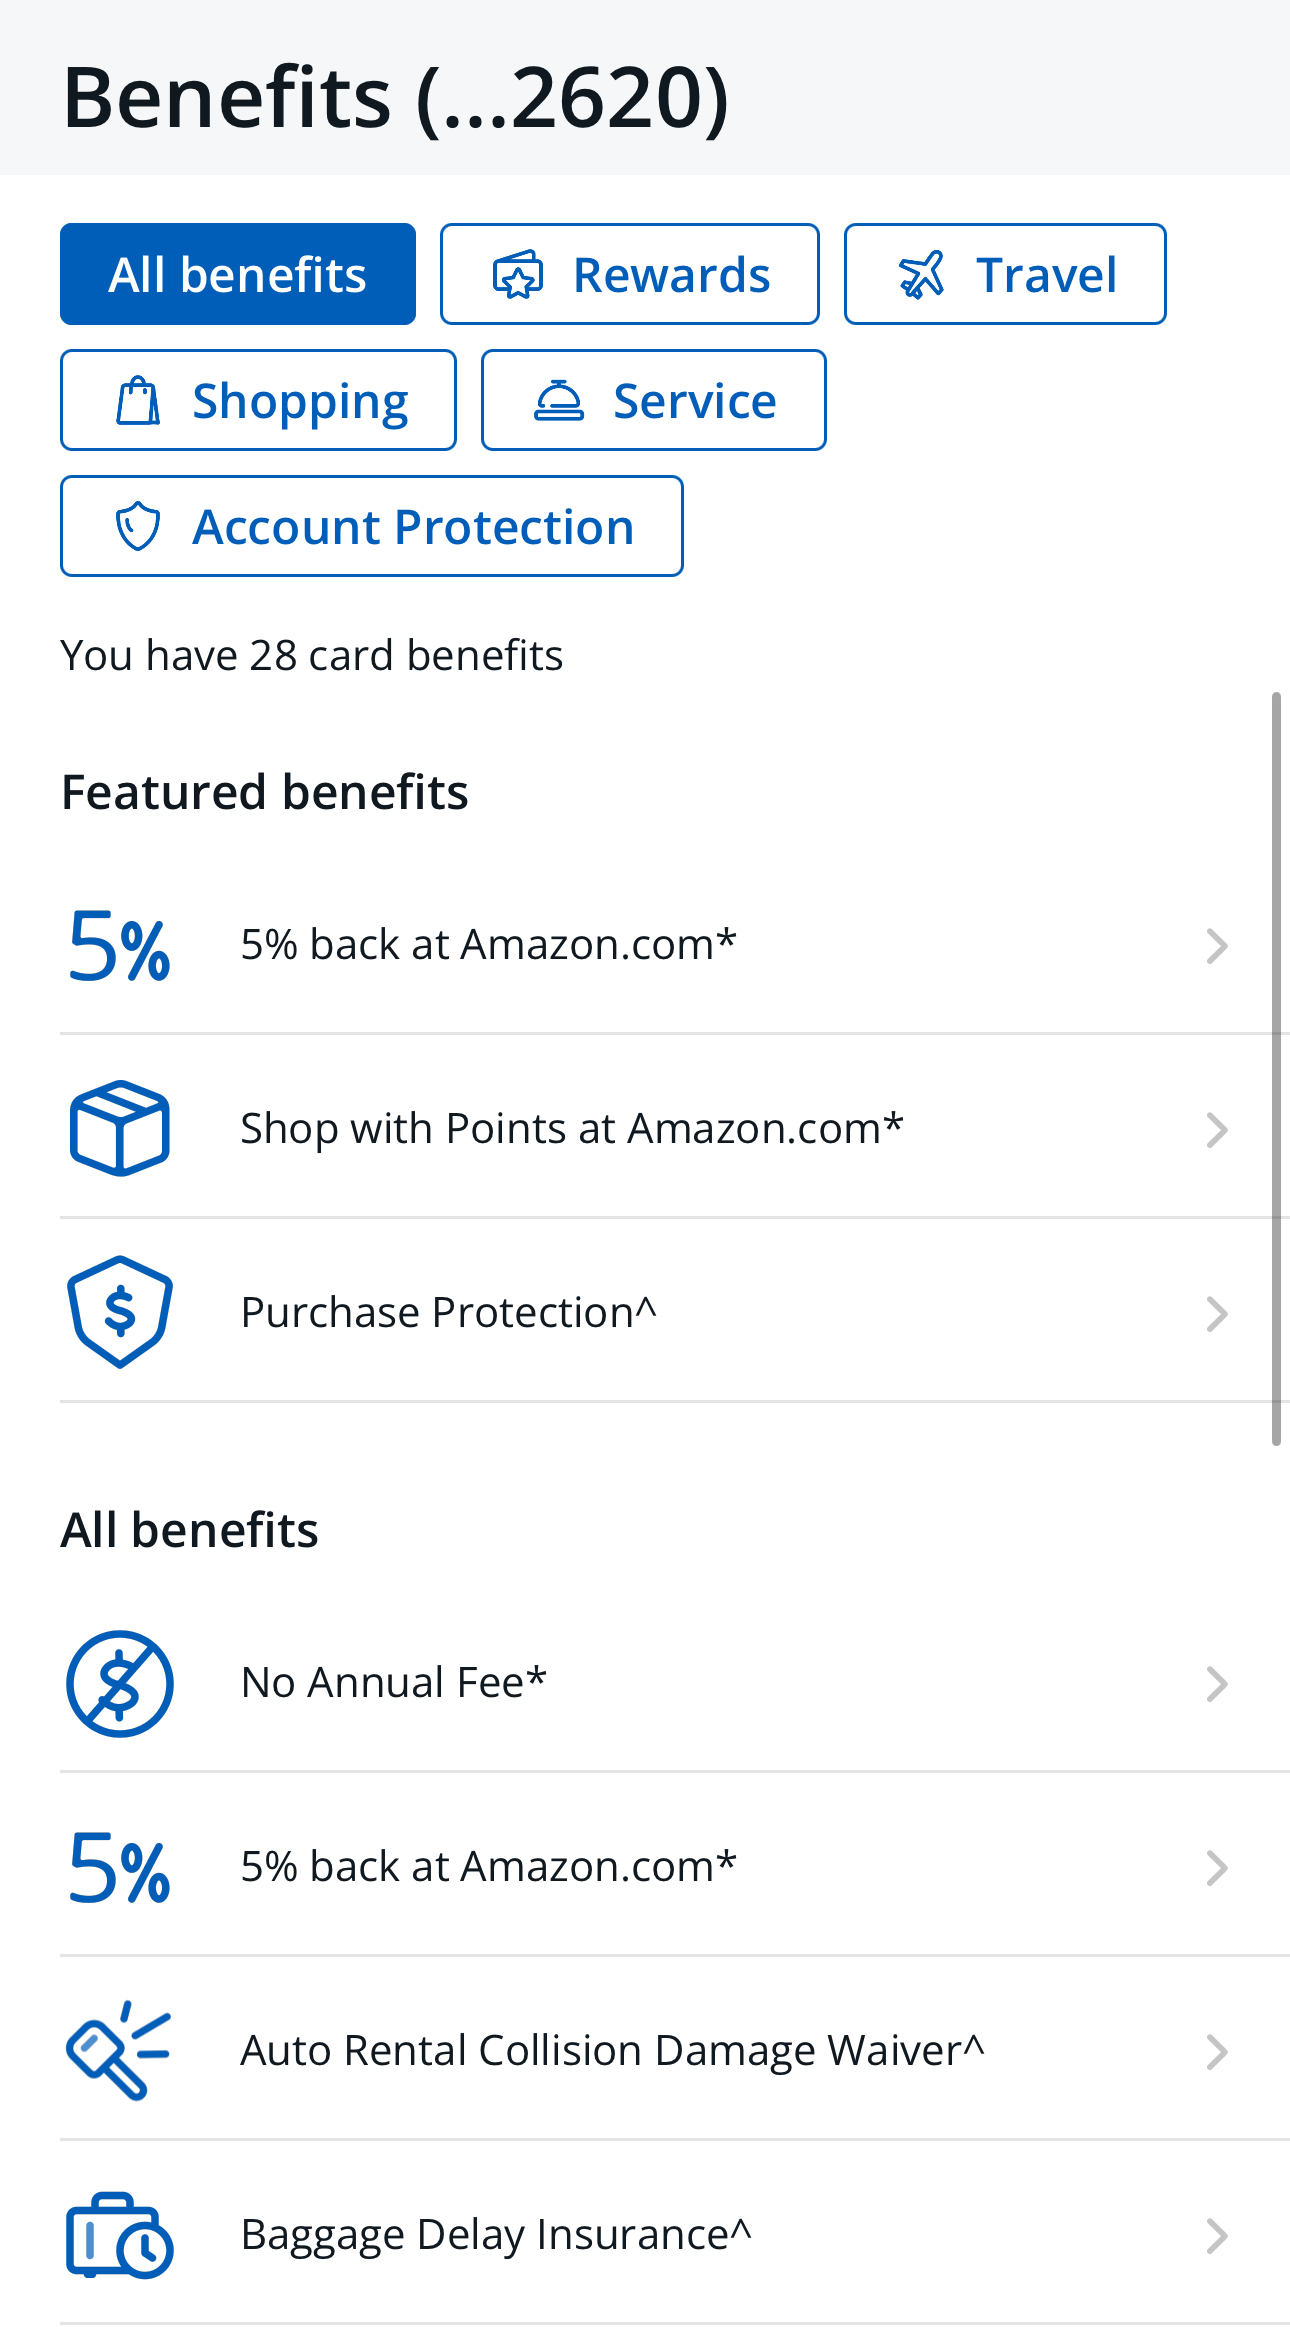 Amazon Prime Visa card benefits by category